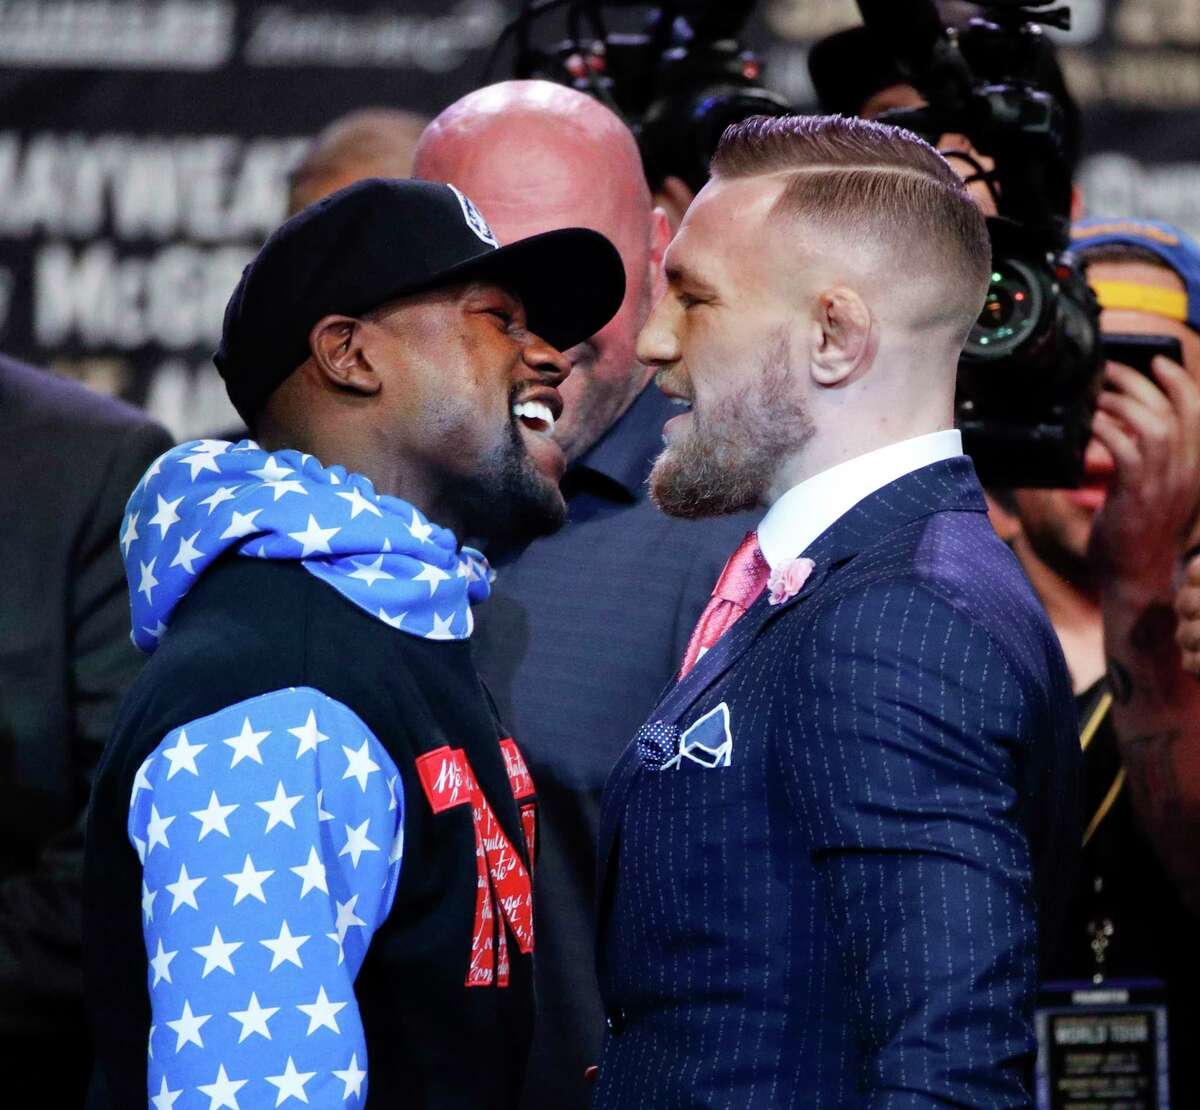 Boxer Floyd Mayweather Jr., left, and mixed martial arts fighter Conor McGregor exchange words during a news conference at Staples Center Tuesday, July 11, 2017, in Los Angeles. The two are scheduled to fight in a boxing match in Las Vegas on Aug. 26. (AP Photo/Jae C. Hong)